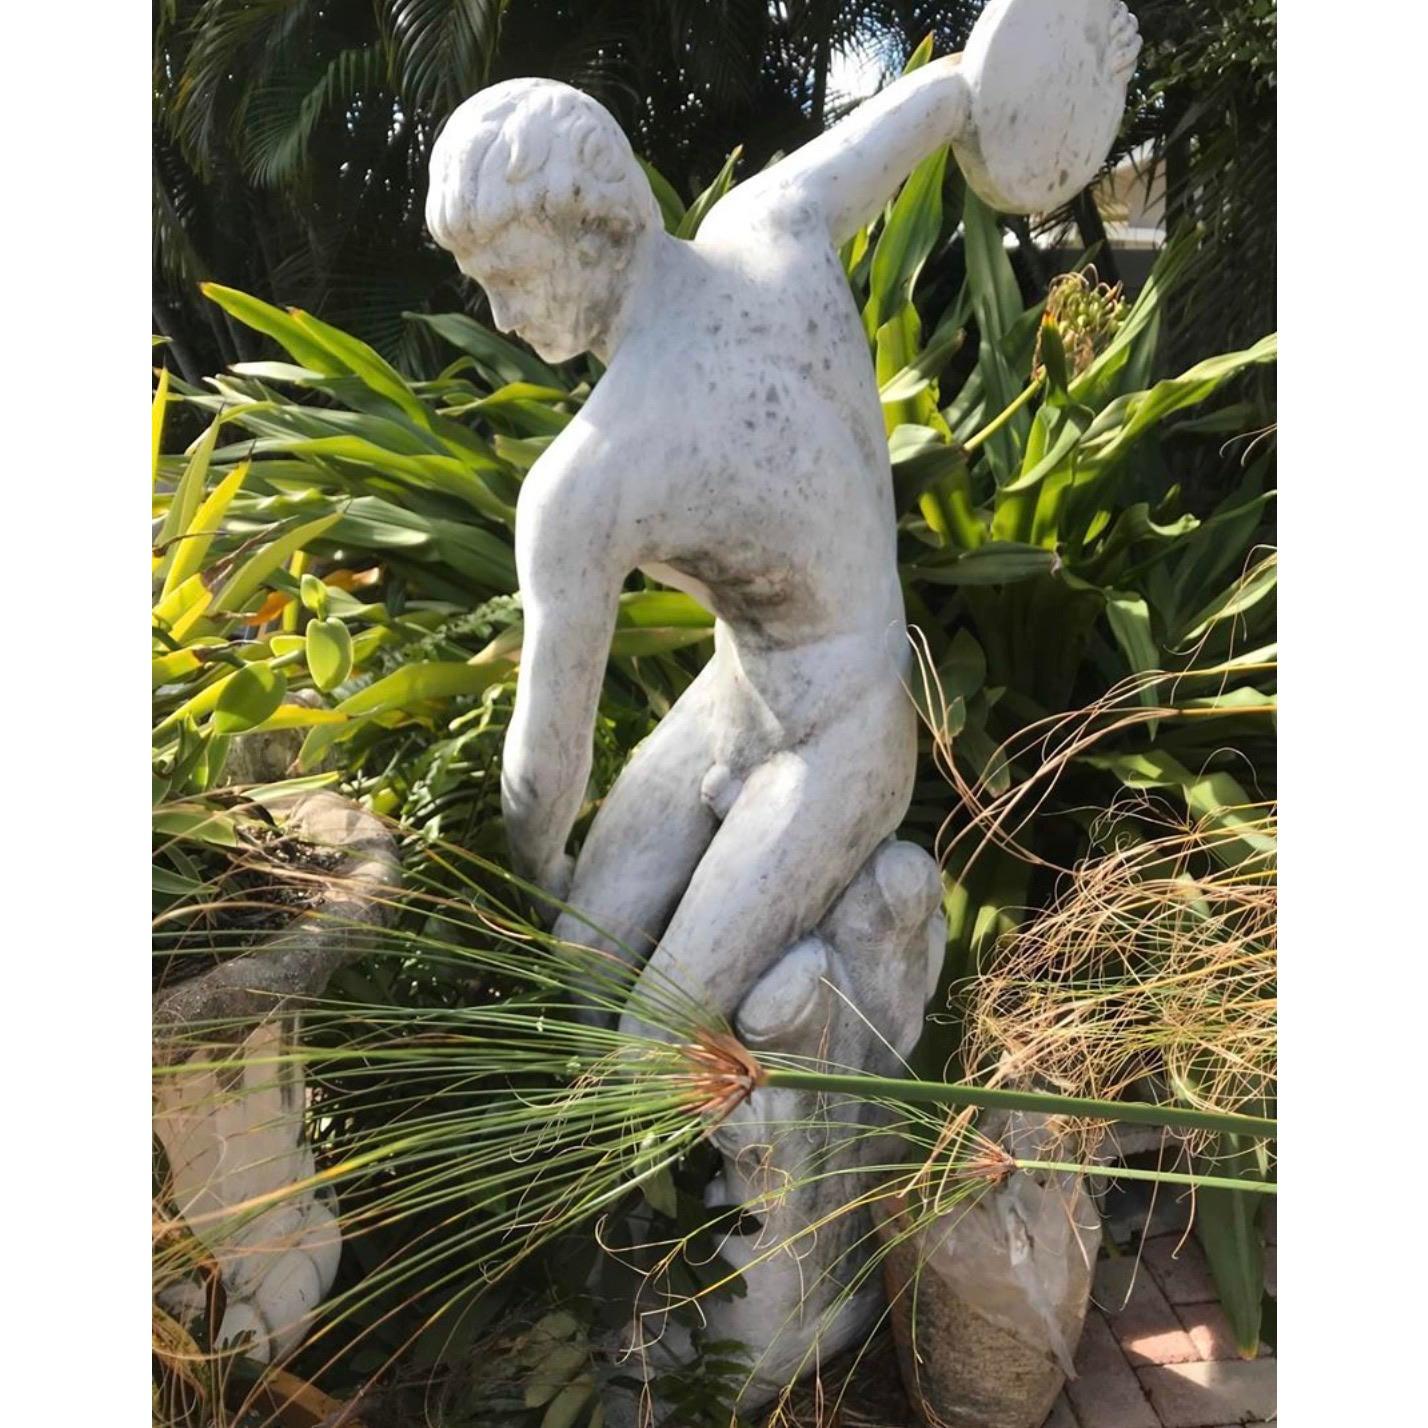 Brilliant life size Greek discus thrower. Super impressive in person. Made of concrete and has a vintage patina. Acquired from a Palm Beach estate.